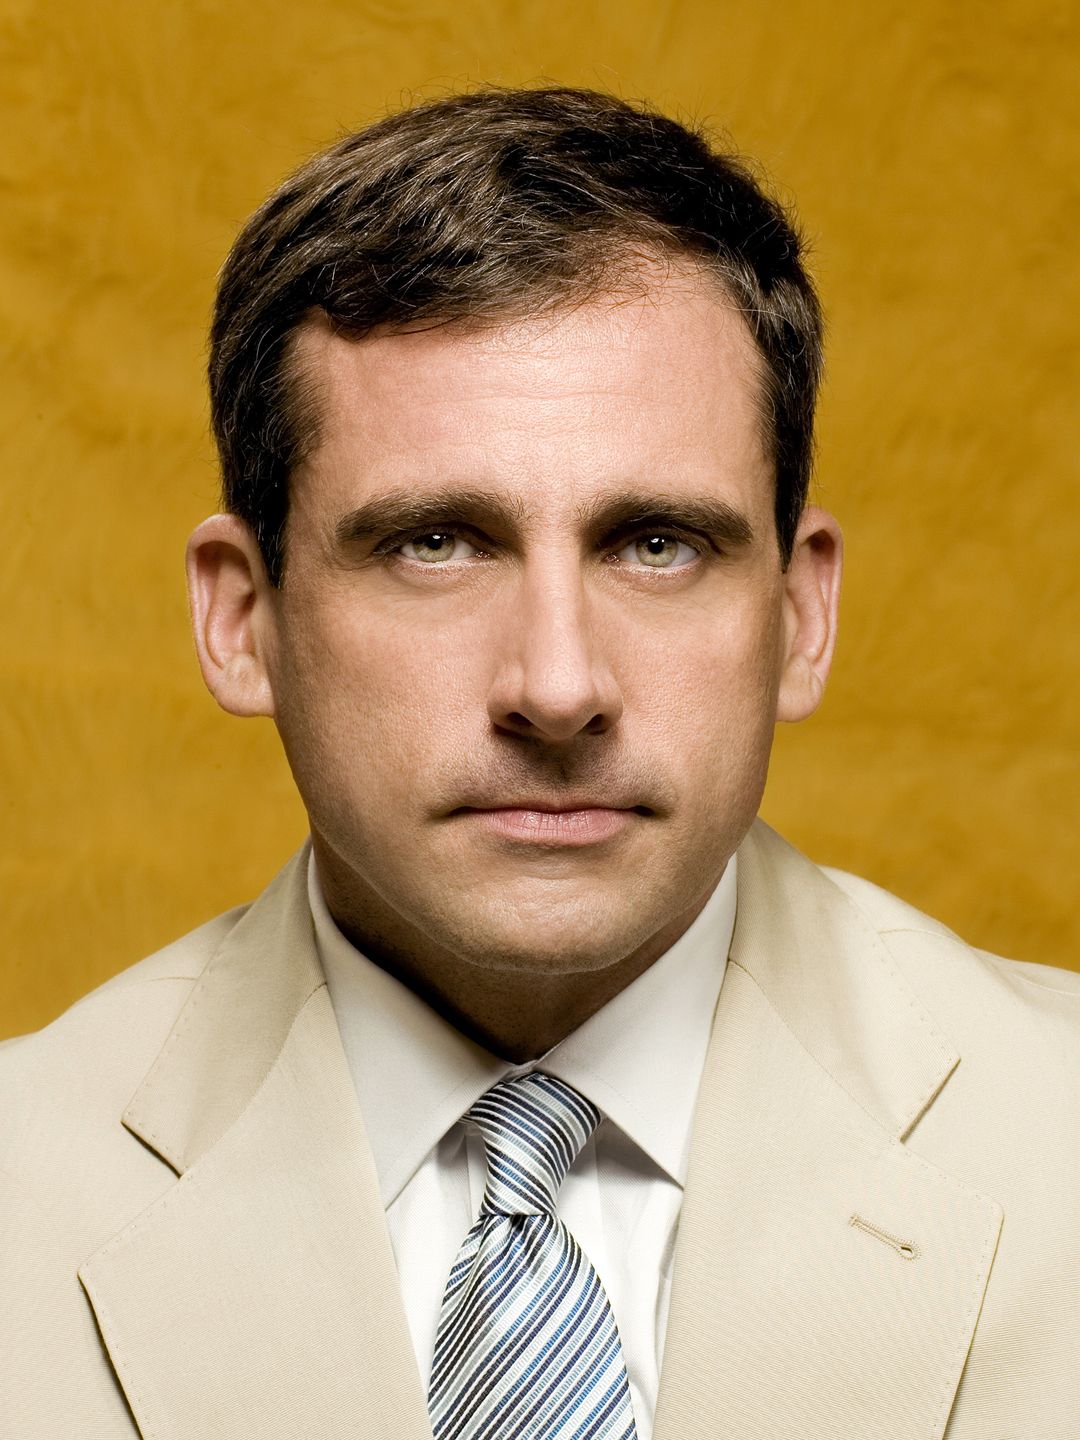 Steve Carell who is his father